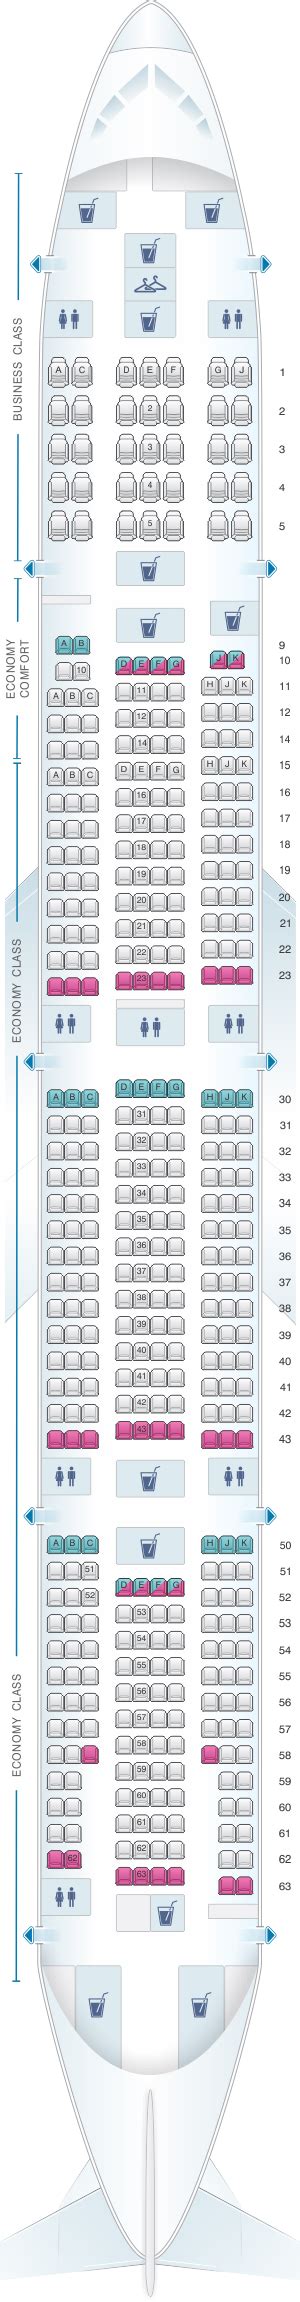 Seat map klm boeing 777 300er. Your guide to KLM seat maps and fleet information, use this before you book or take a flight. Seat Maps; Airlines; Cheap Flights; Comparison Charts. Short-haul Economy Class ... All Seats: AC Power: No: Boeing 777-300ER (77W) 34: 17.5: Standard: On-Demand TV: All Seats: AC Power: No: Boeing 787-10 (781) 31: 17.5: Standard: On-Demand TV: All ... 